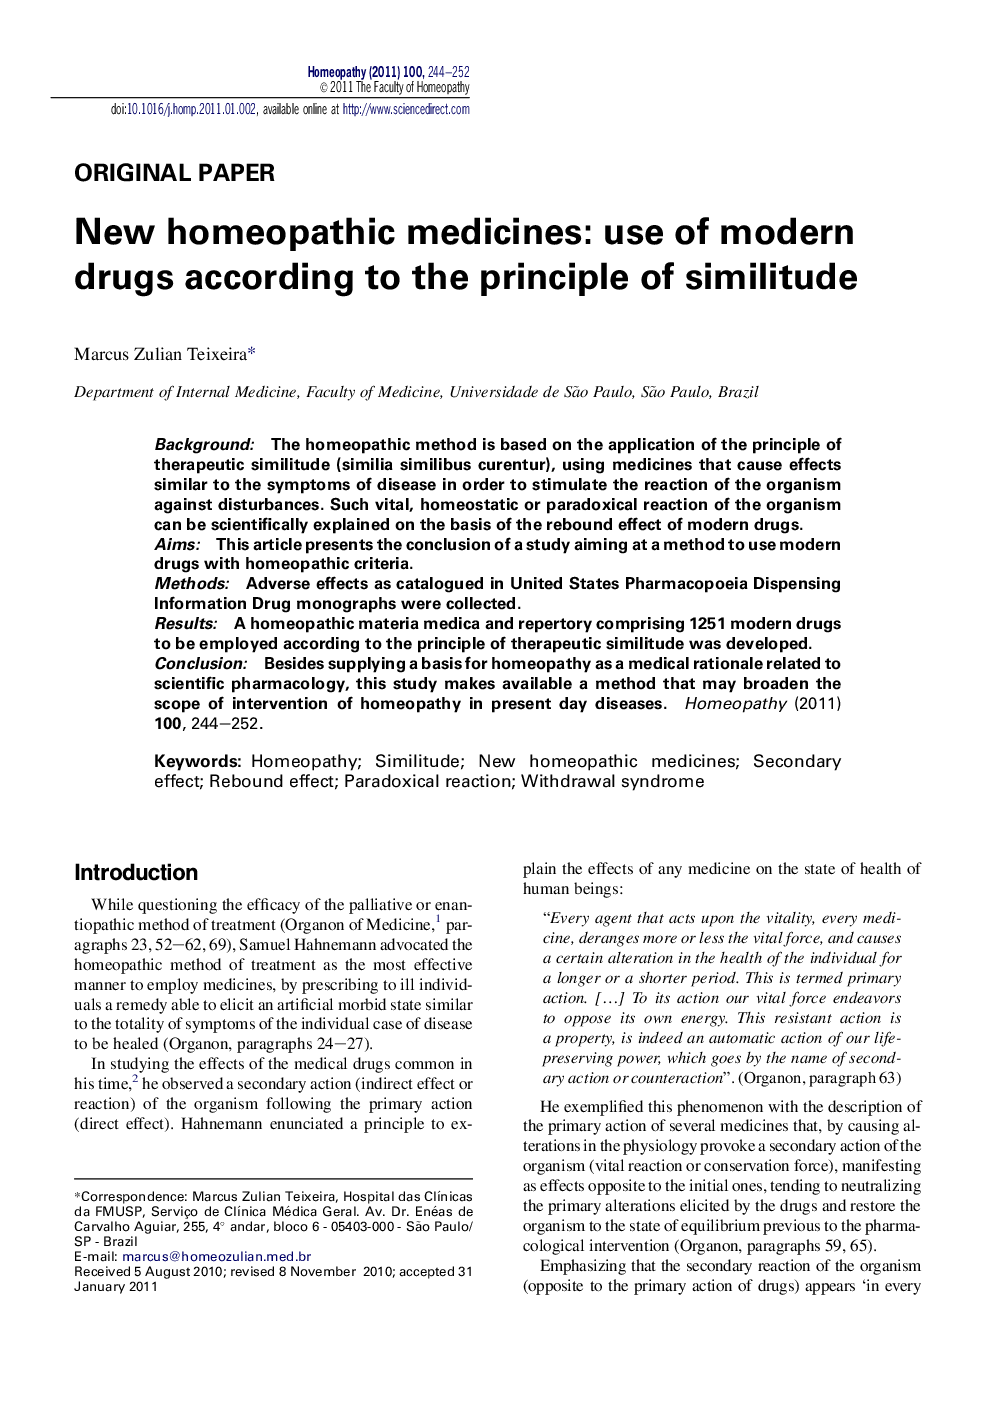 New homeopathic medicines: use of modern drugs according to the principle of similitude